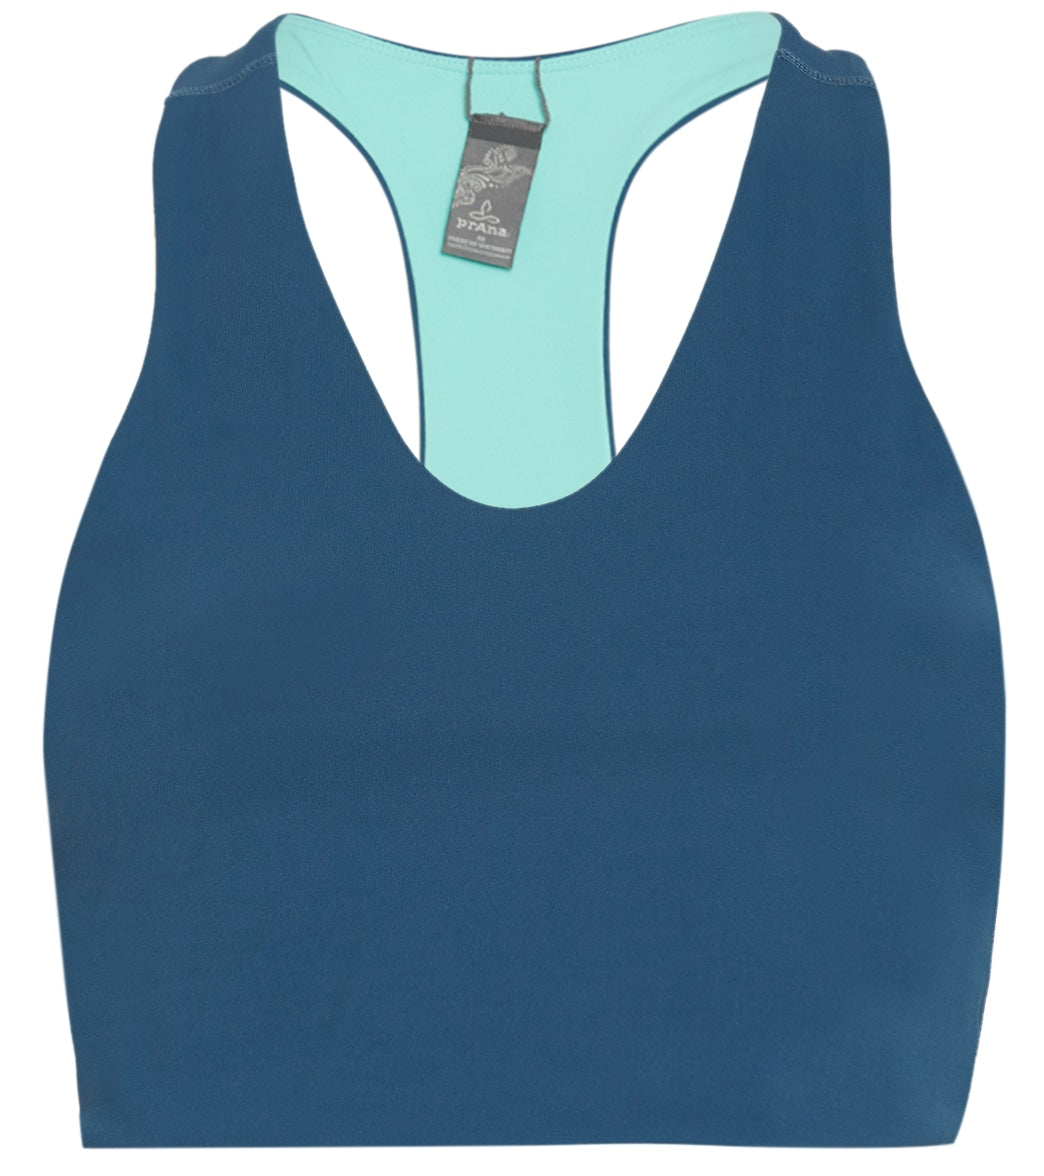 prAna Momento Yoga Crop Top at YogaOutlet.com - Free Shipping –